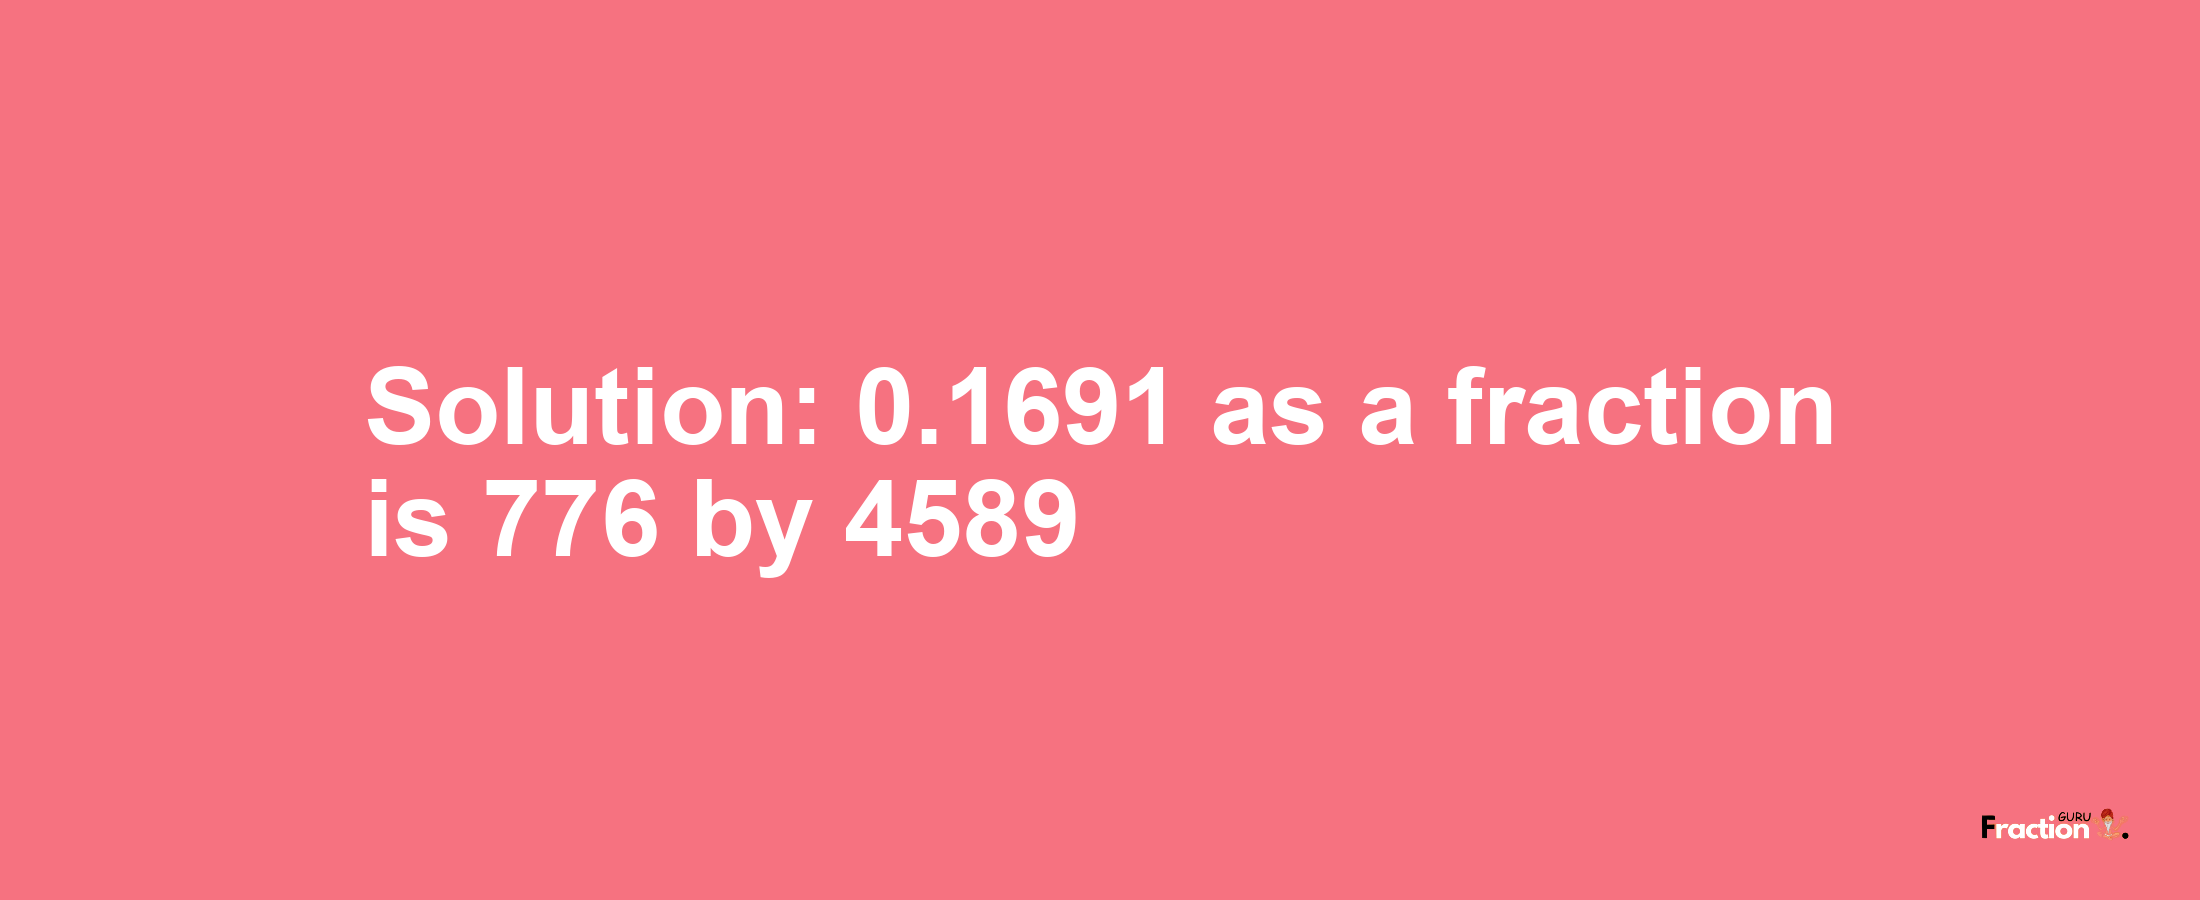 Solution:0.1691 as a fraction is 776/4589